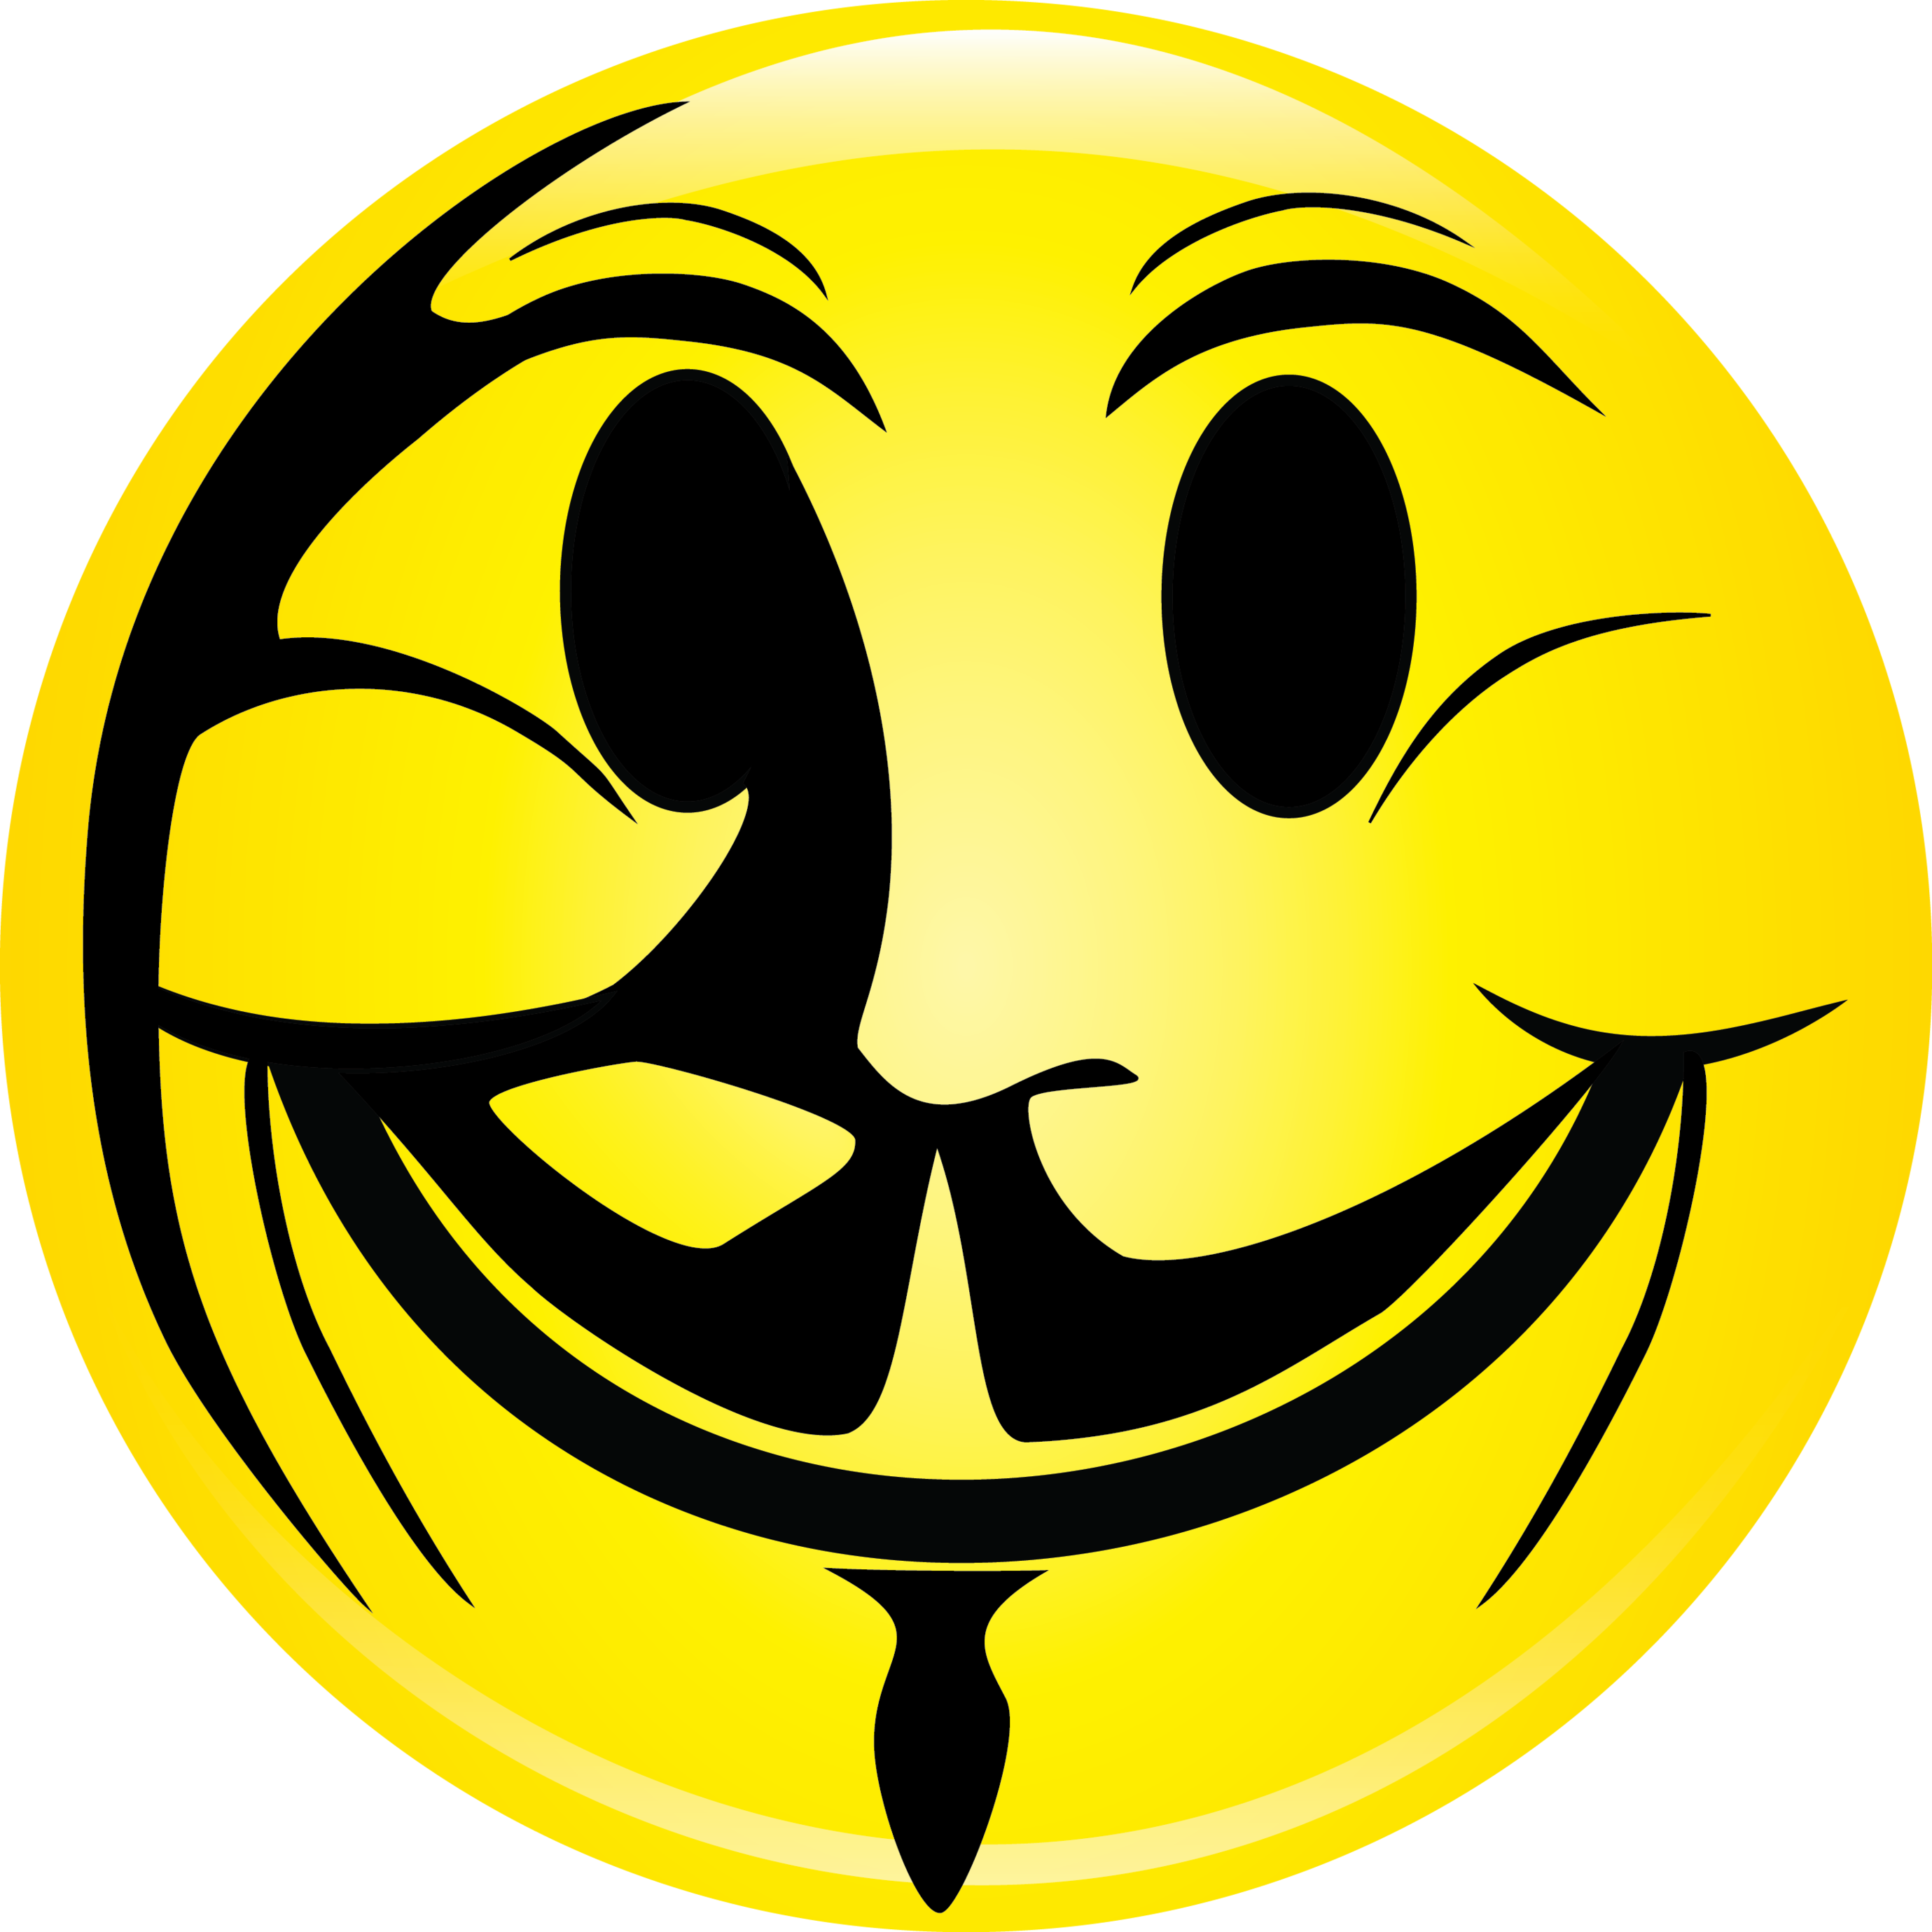 Devil Horns Smiley Clipart - Free to use Clip Art Resource